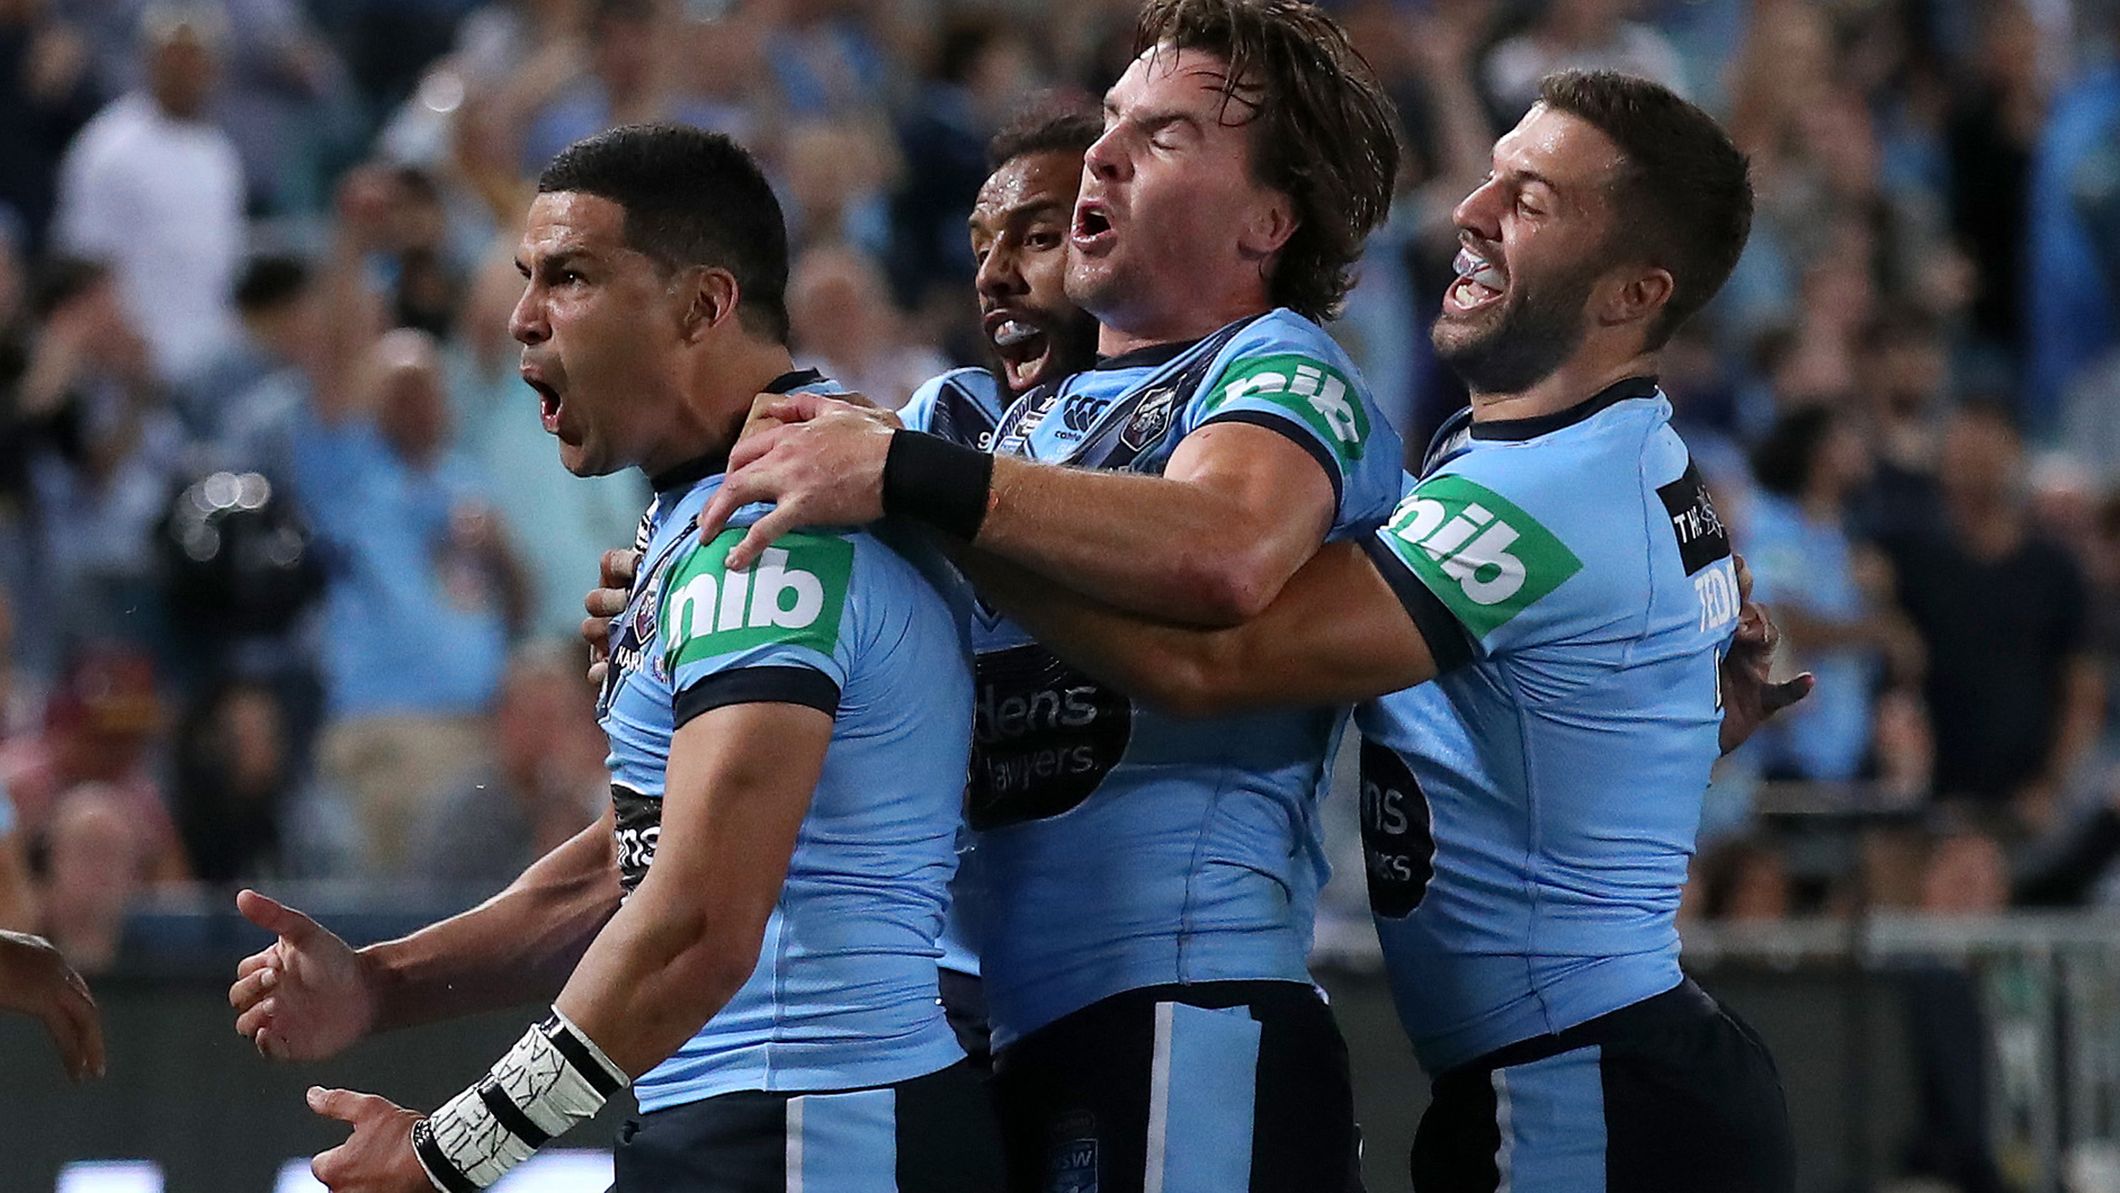 Blues halves punt that would leave an Origin dream in tatters as Brad Fittler mulls huge decision